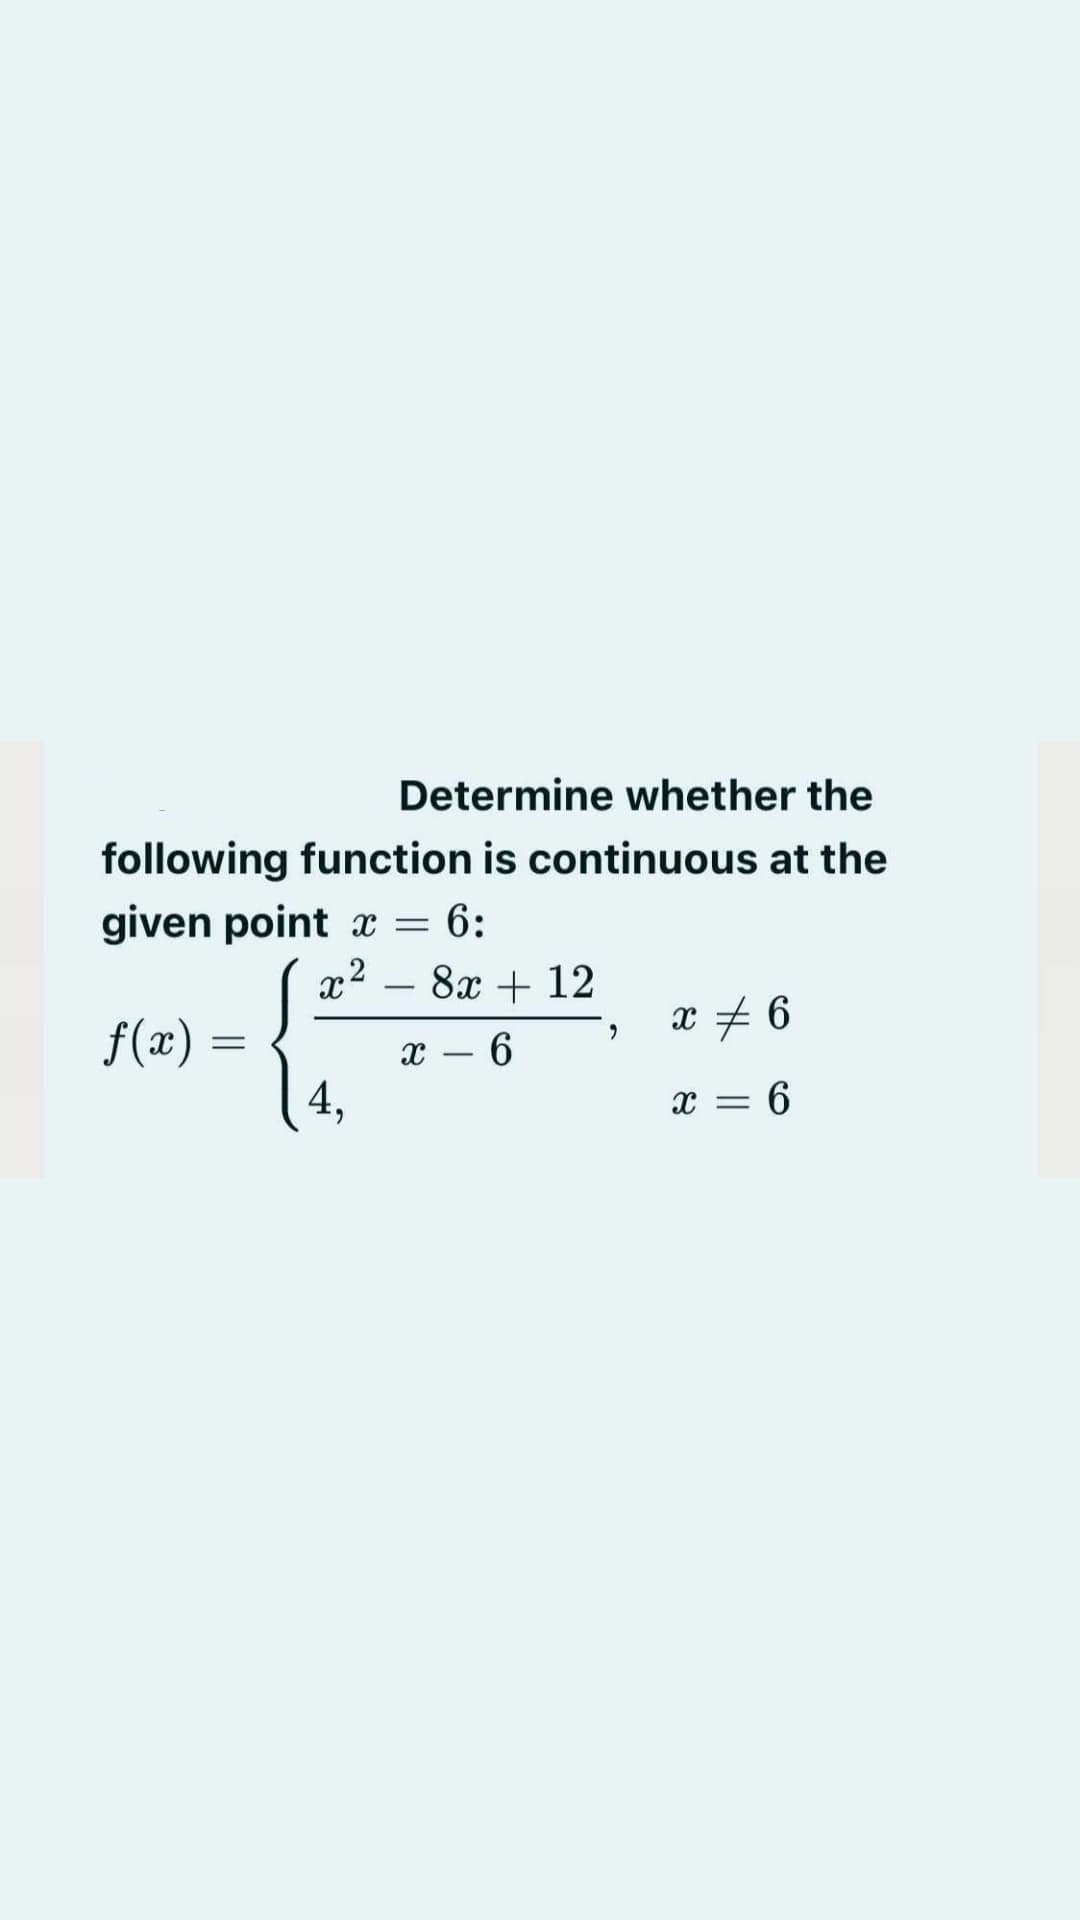 Determine whether the
following function is continuous at the
given point x = 6:
x2
8x + 12
-
f(x) =
x + 6
x – 6
4,
-
6
